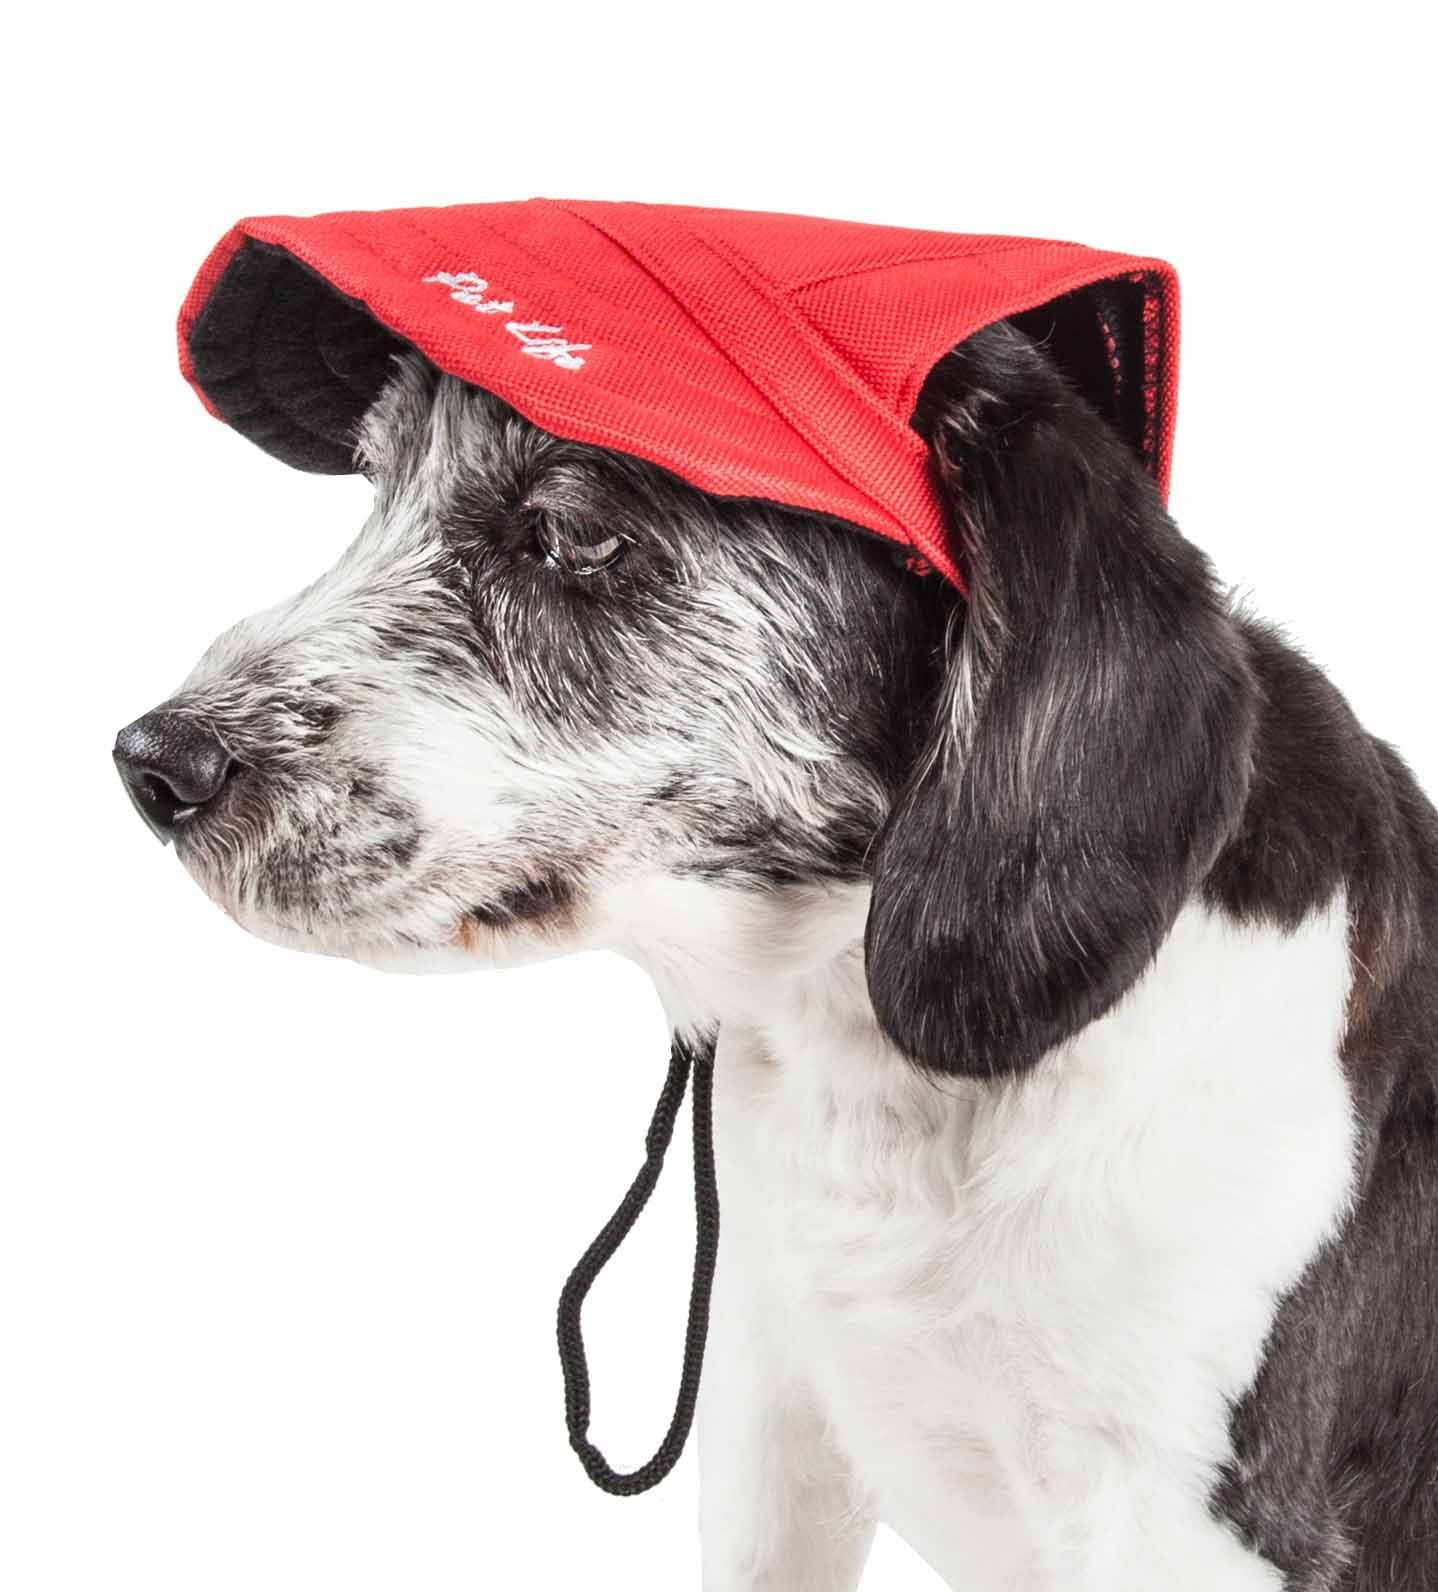 NWT Pet Dog Costume Holiday Red Winter Trapper Hat Cap w/ White Fleece Fur M/L 